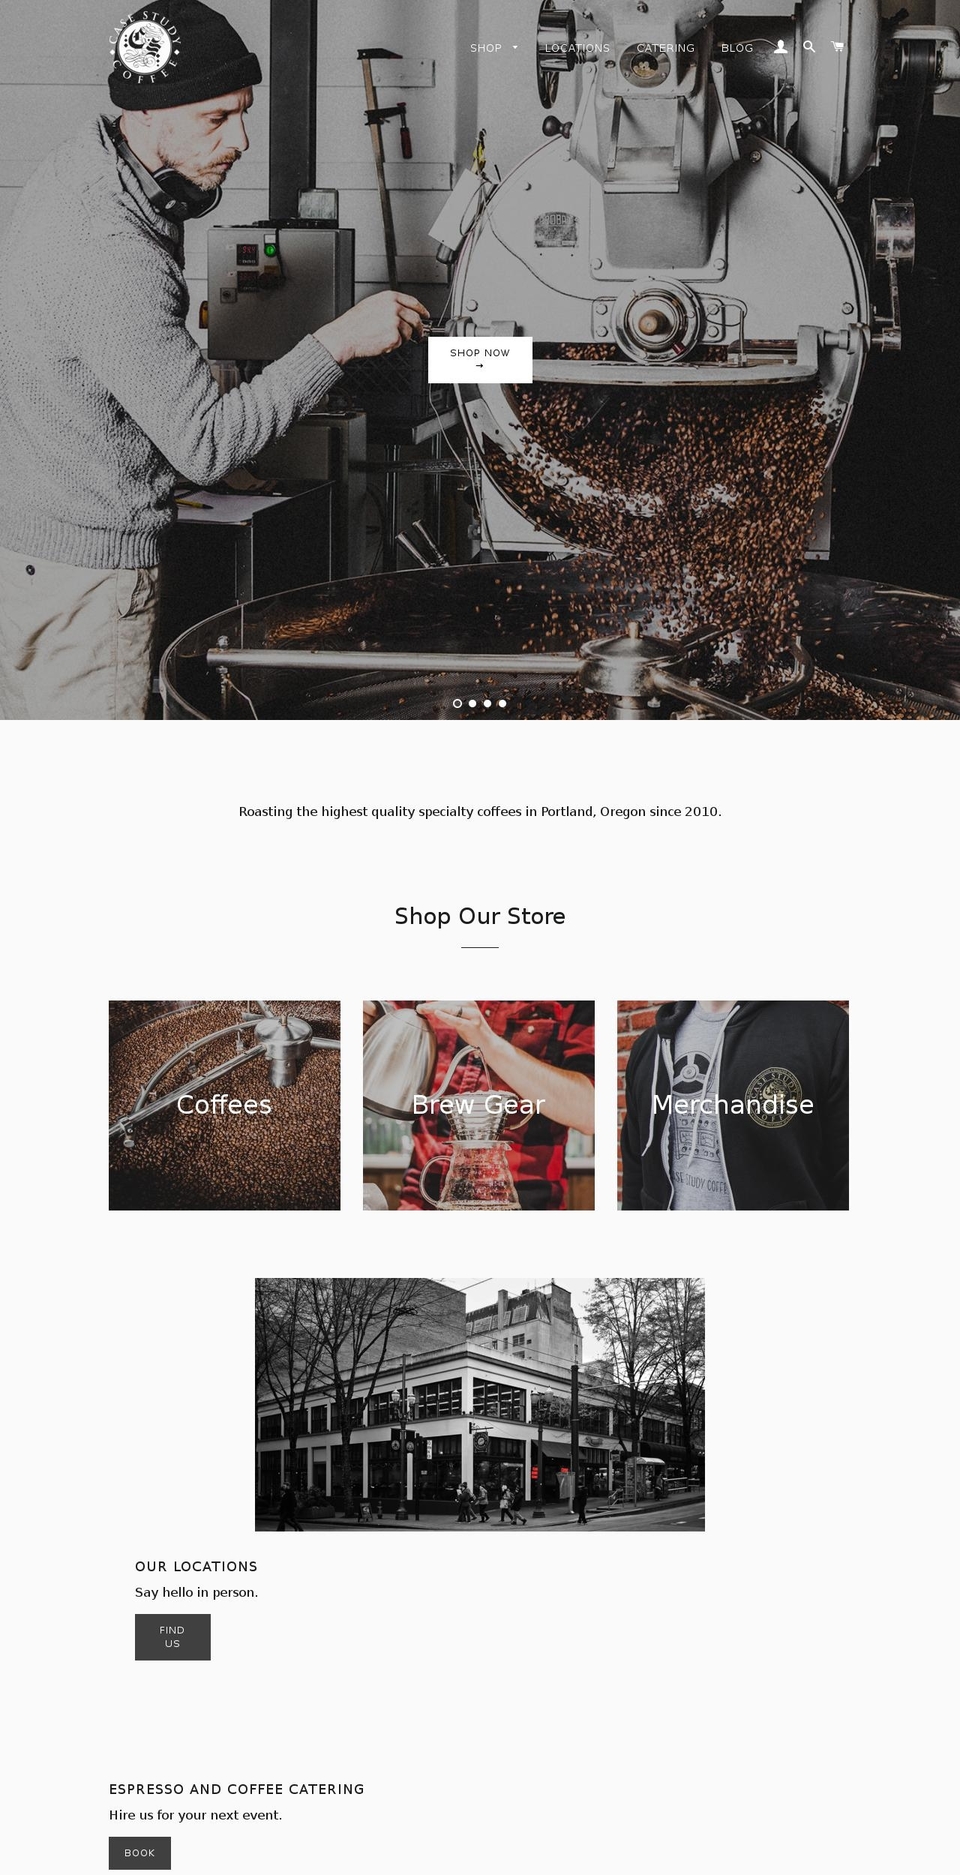 Brooklyn Shopify theme site example casestudycoffee.com